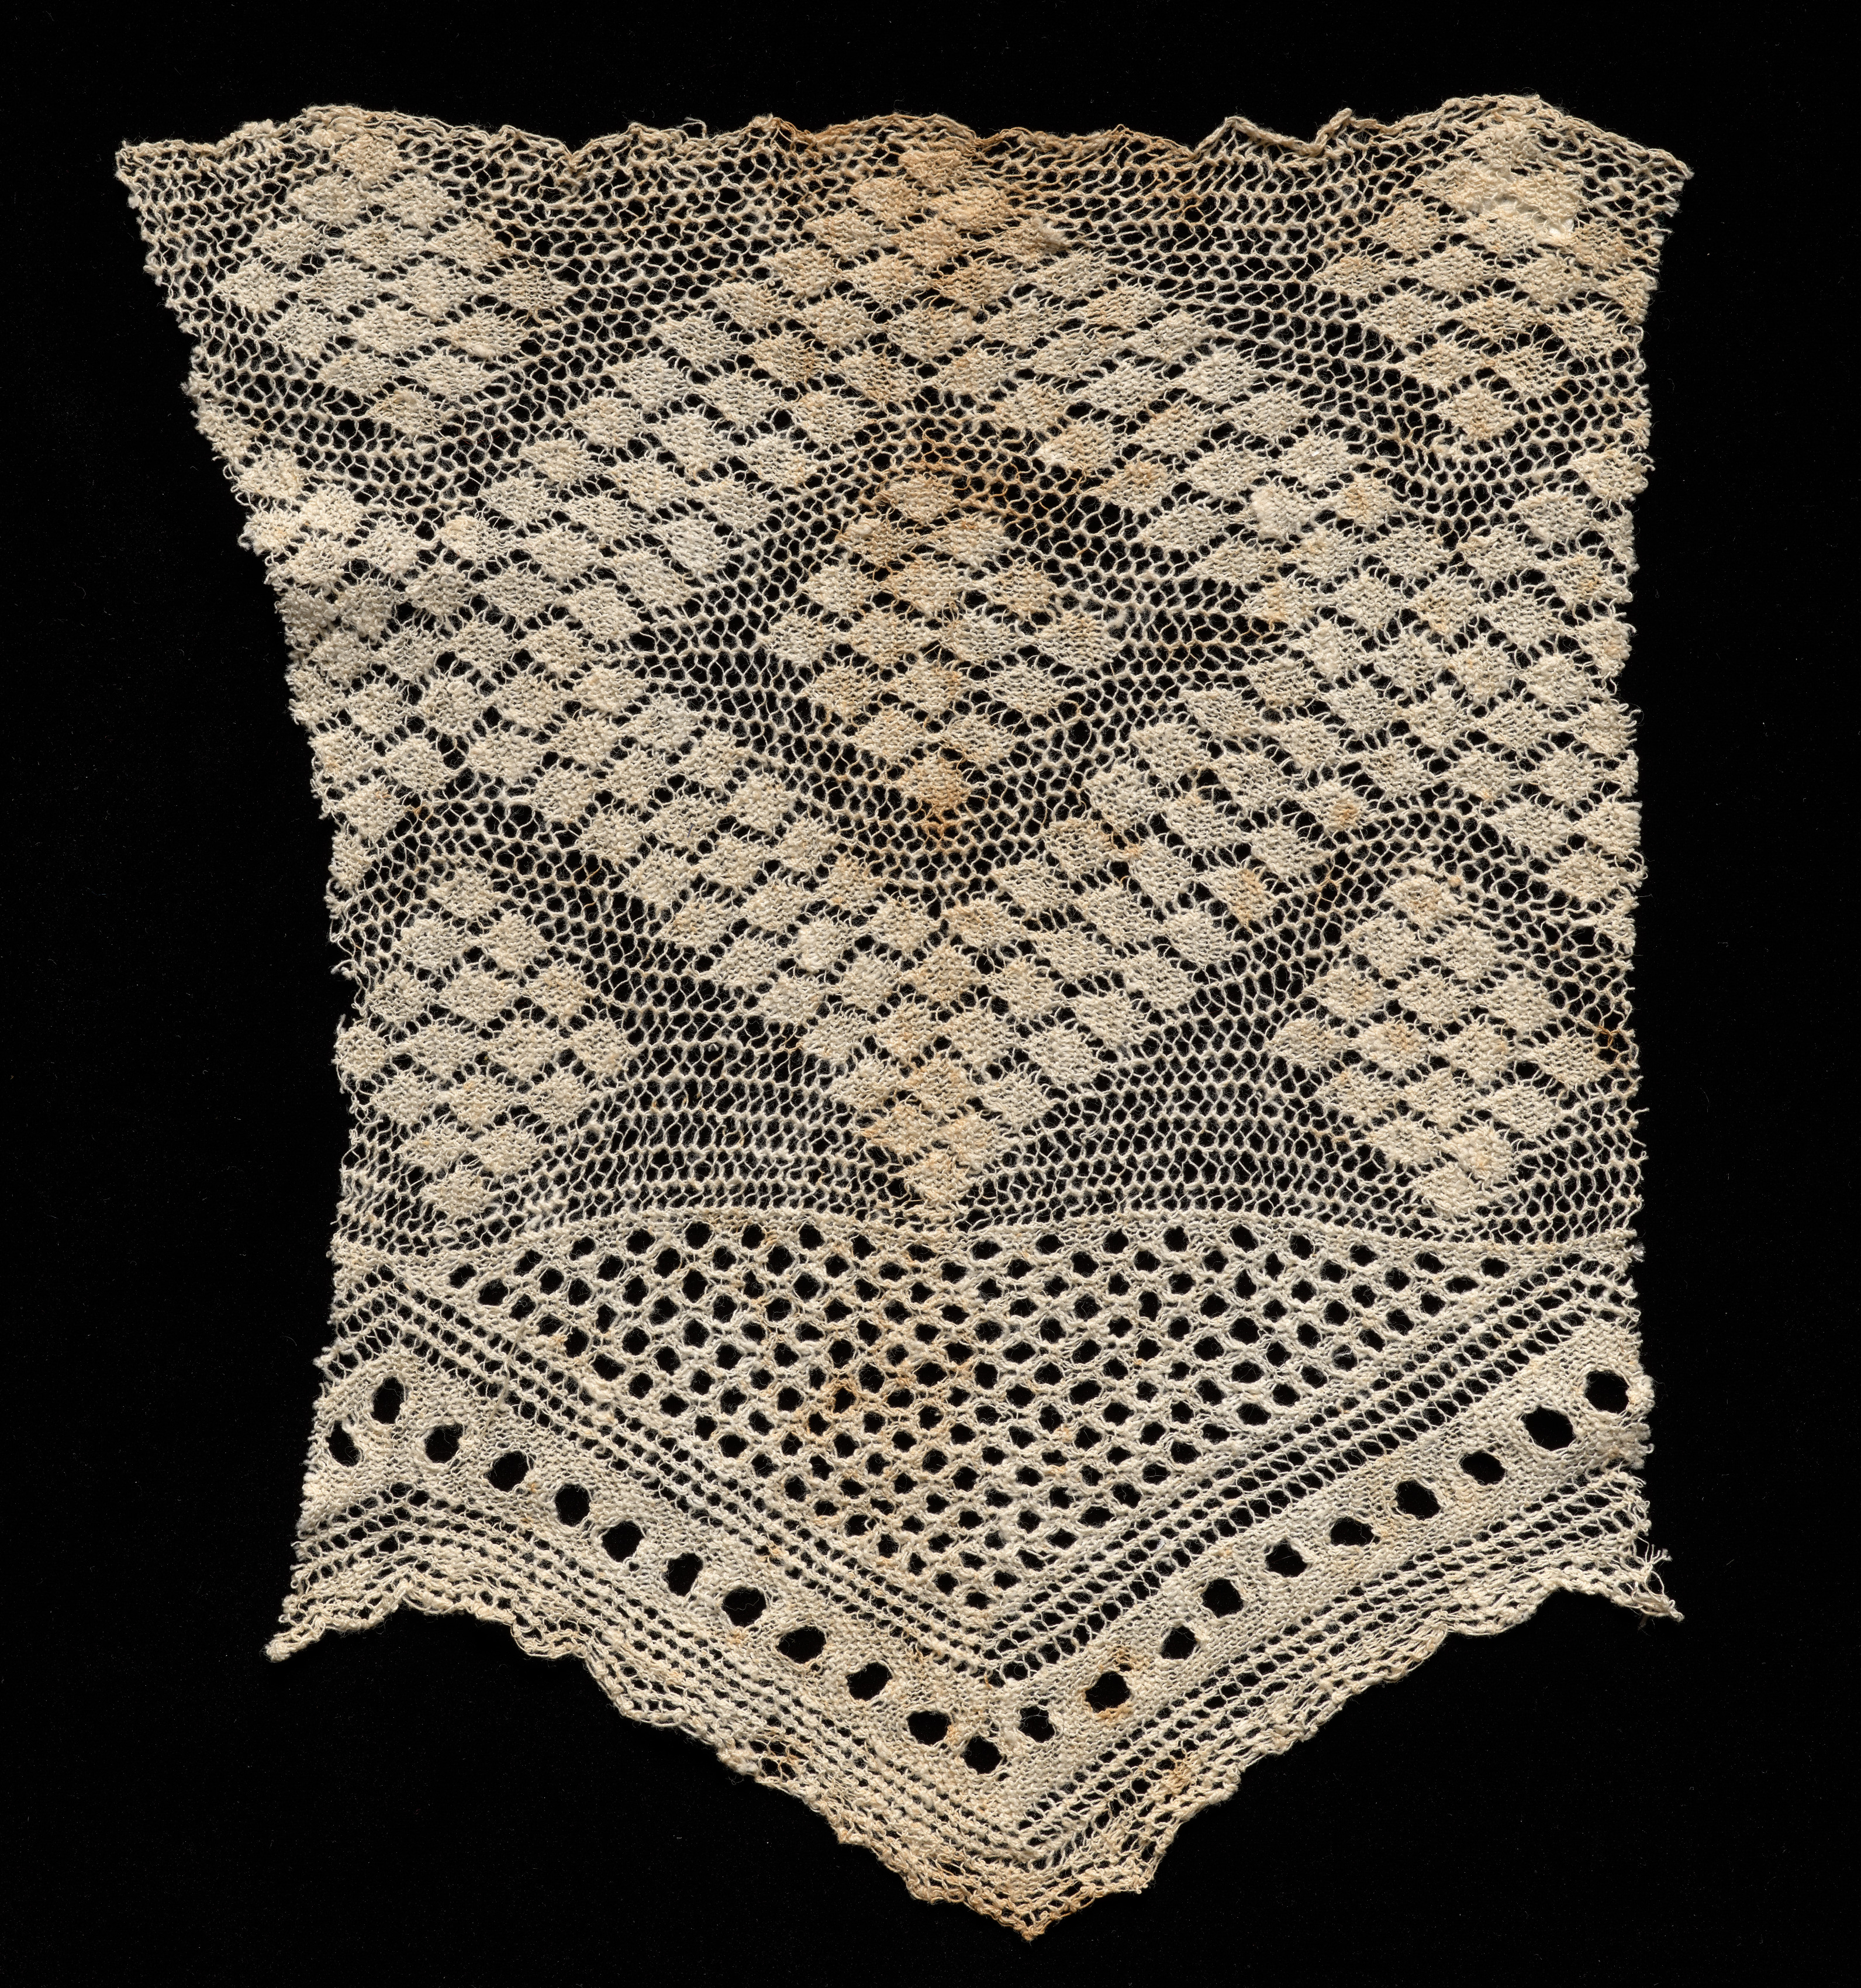 Fragment of Knitted Lace Flounce